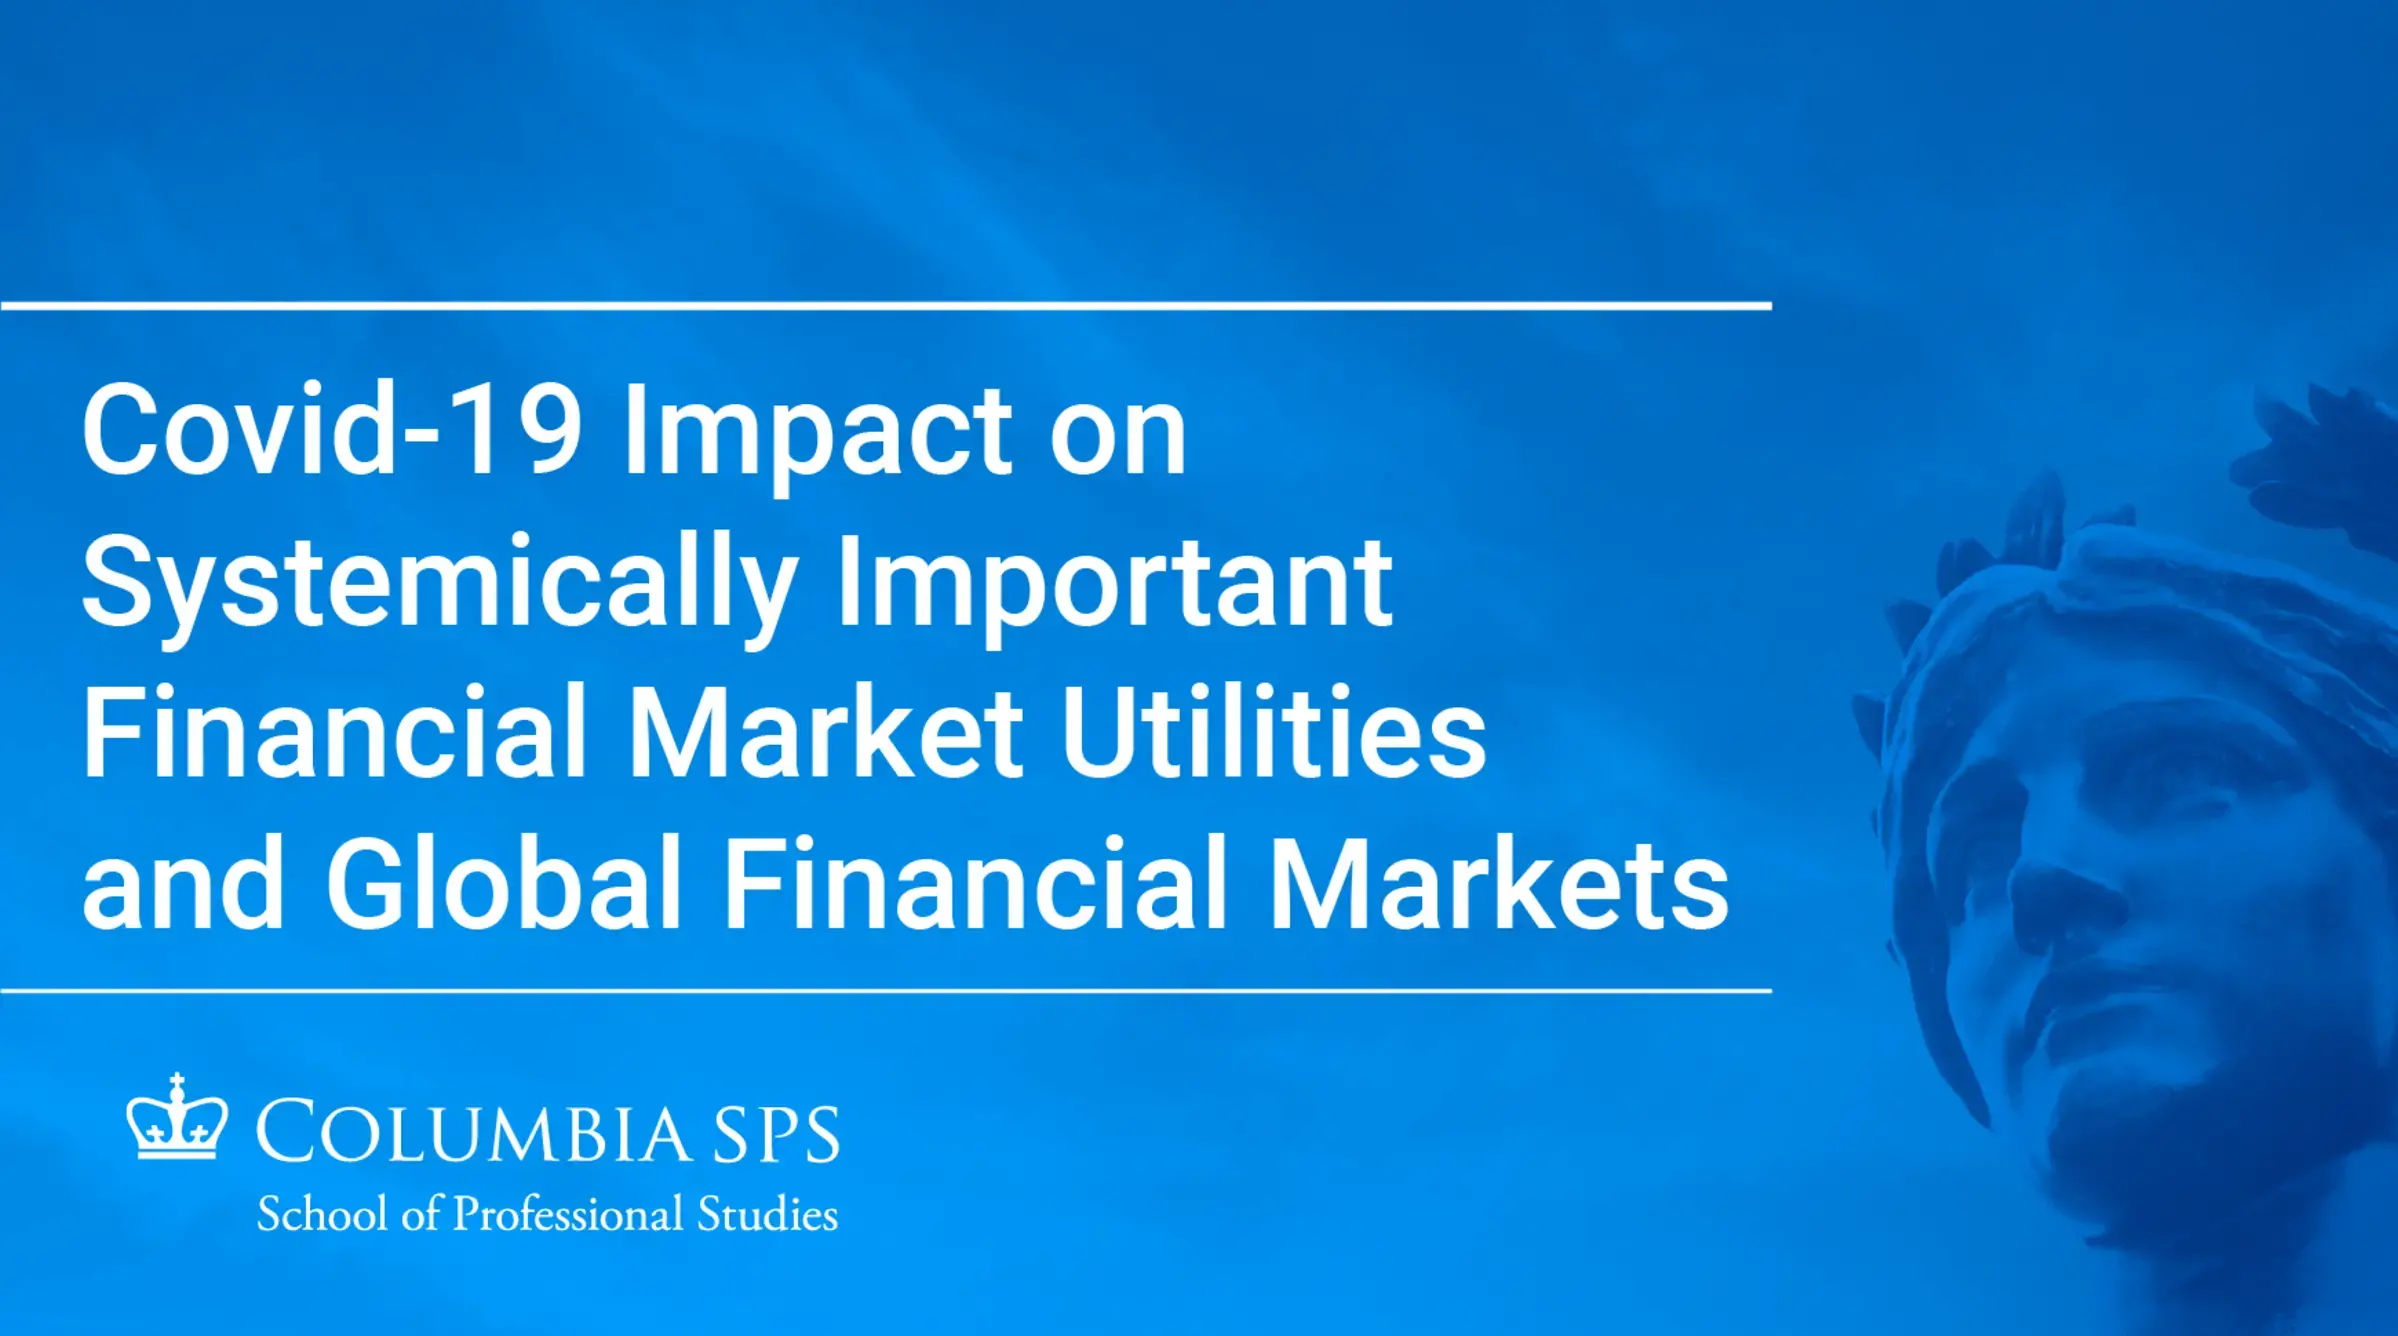 COVID-19's Impact on Systemically Important Financial Market Utilities and Global Financial Markets Video Cover Image